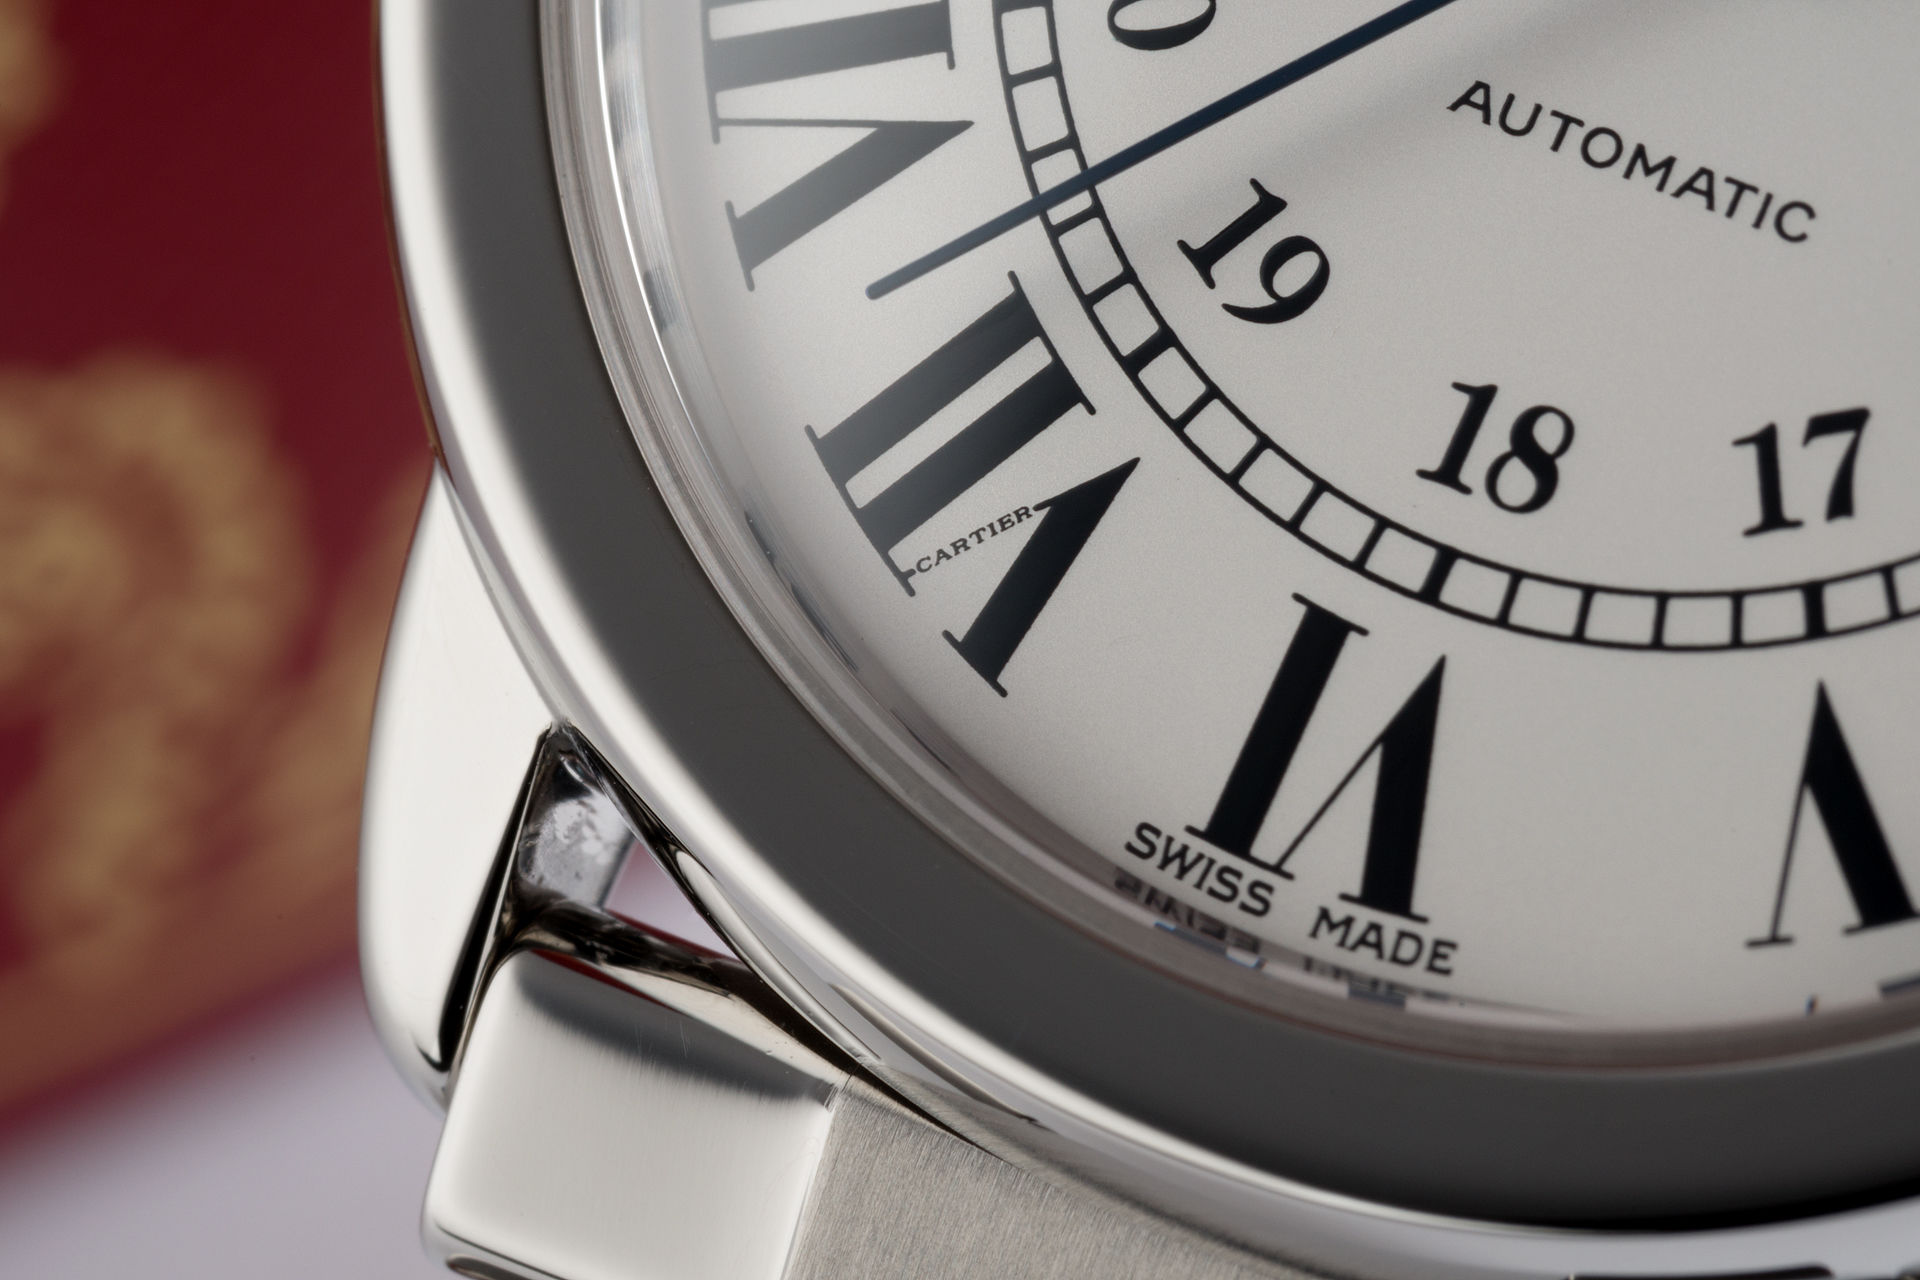 ref WSRN0012 | 36mm 'Box & Papers' | Cartier Ronde